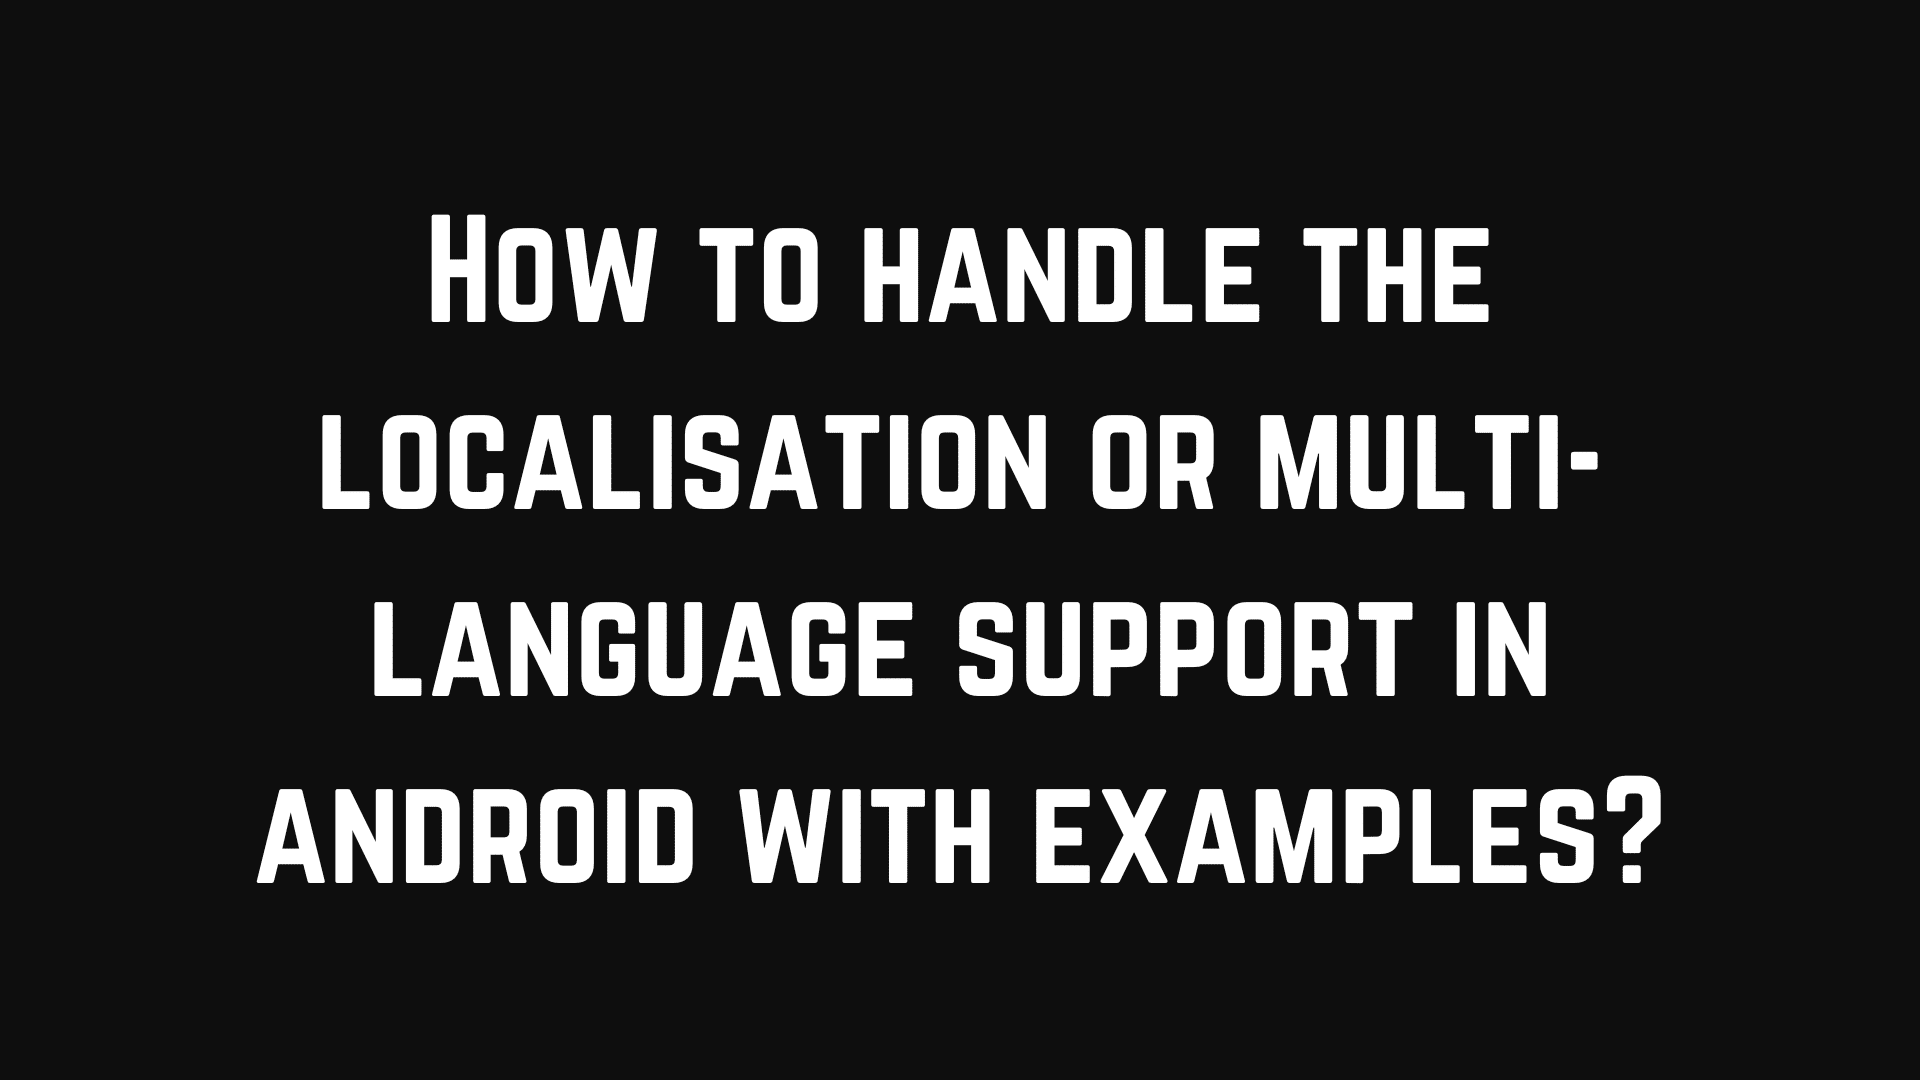 How to handle the localisation or multi language support in android with examples?